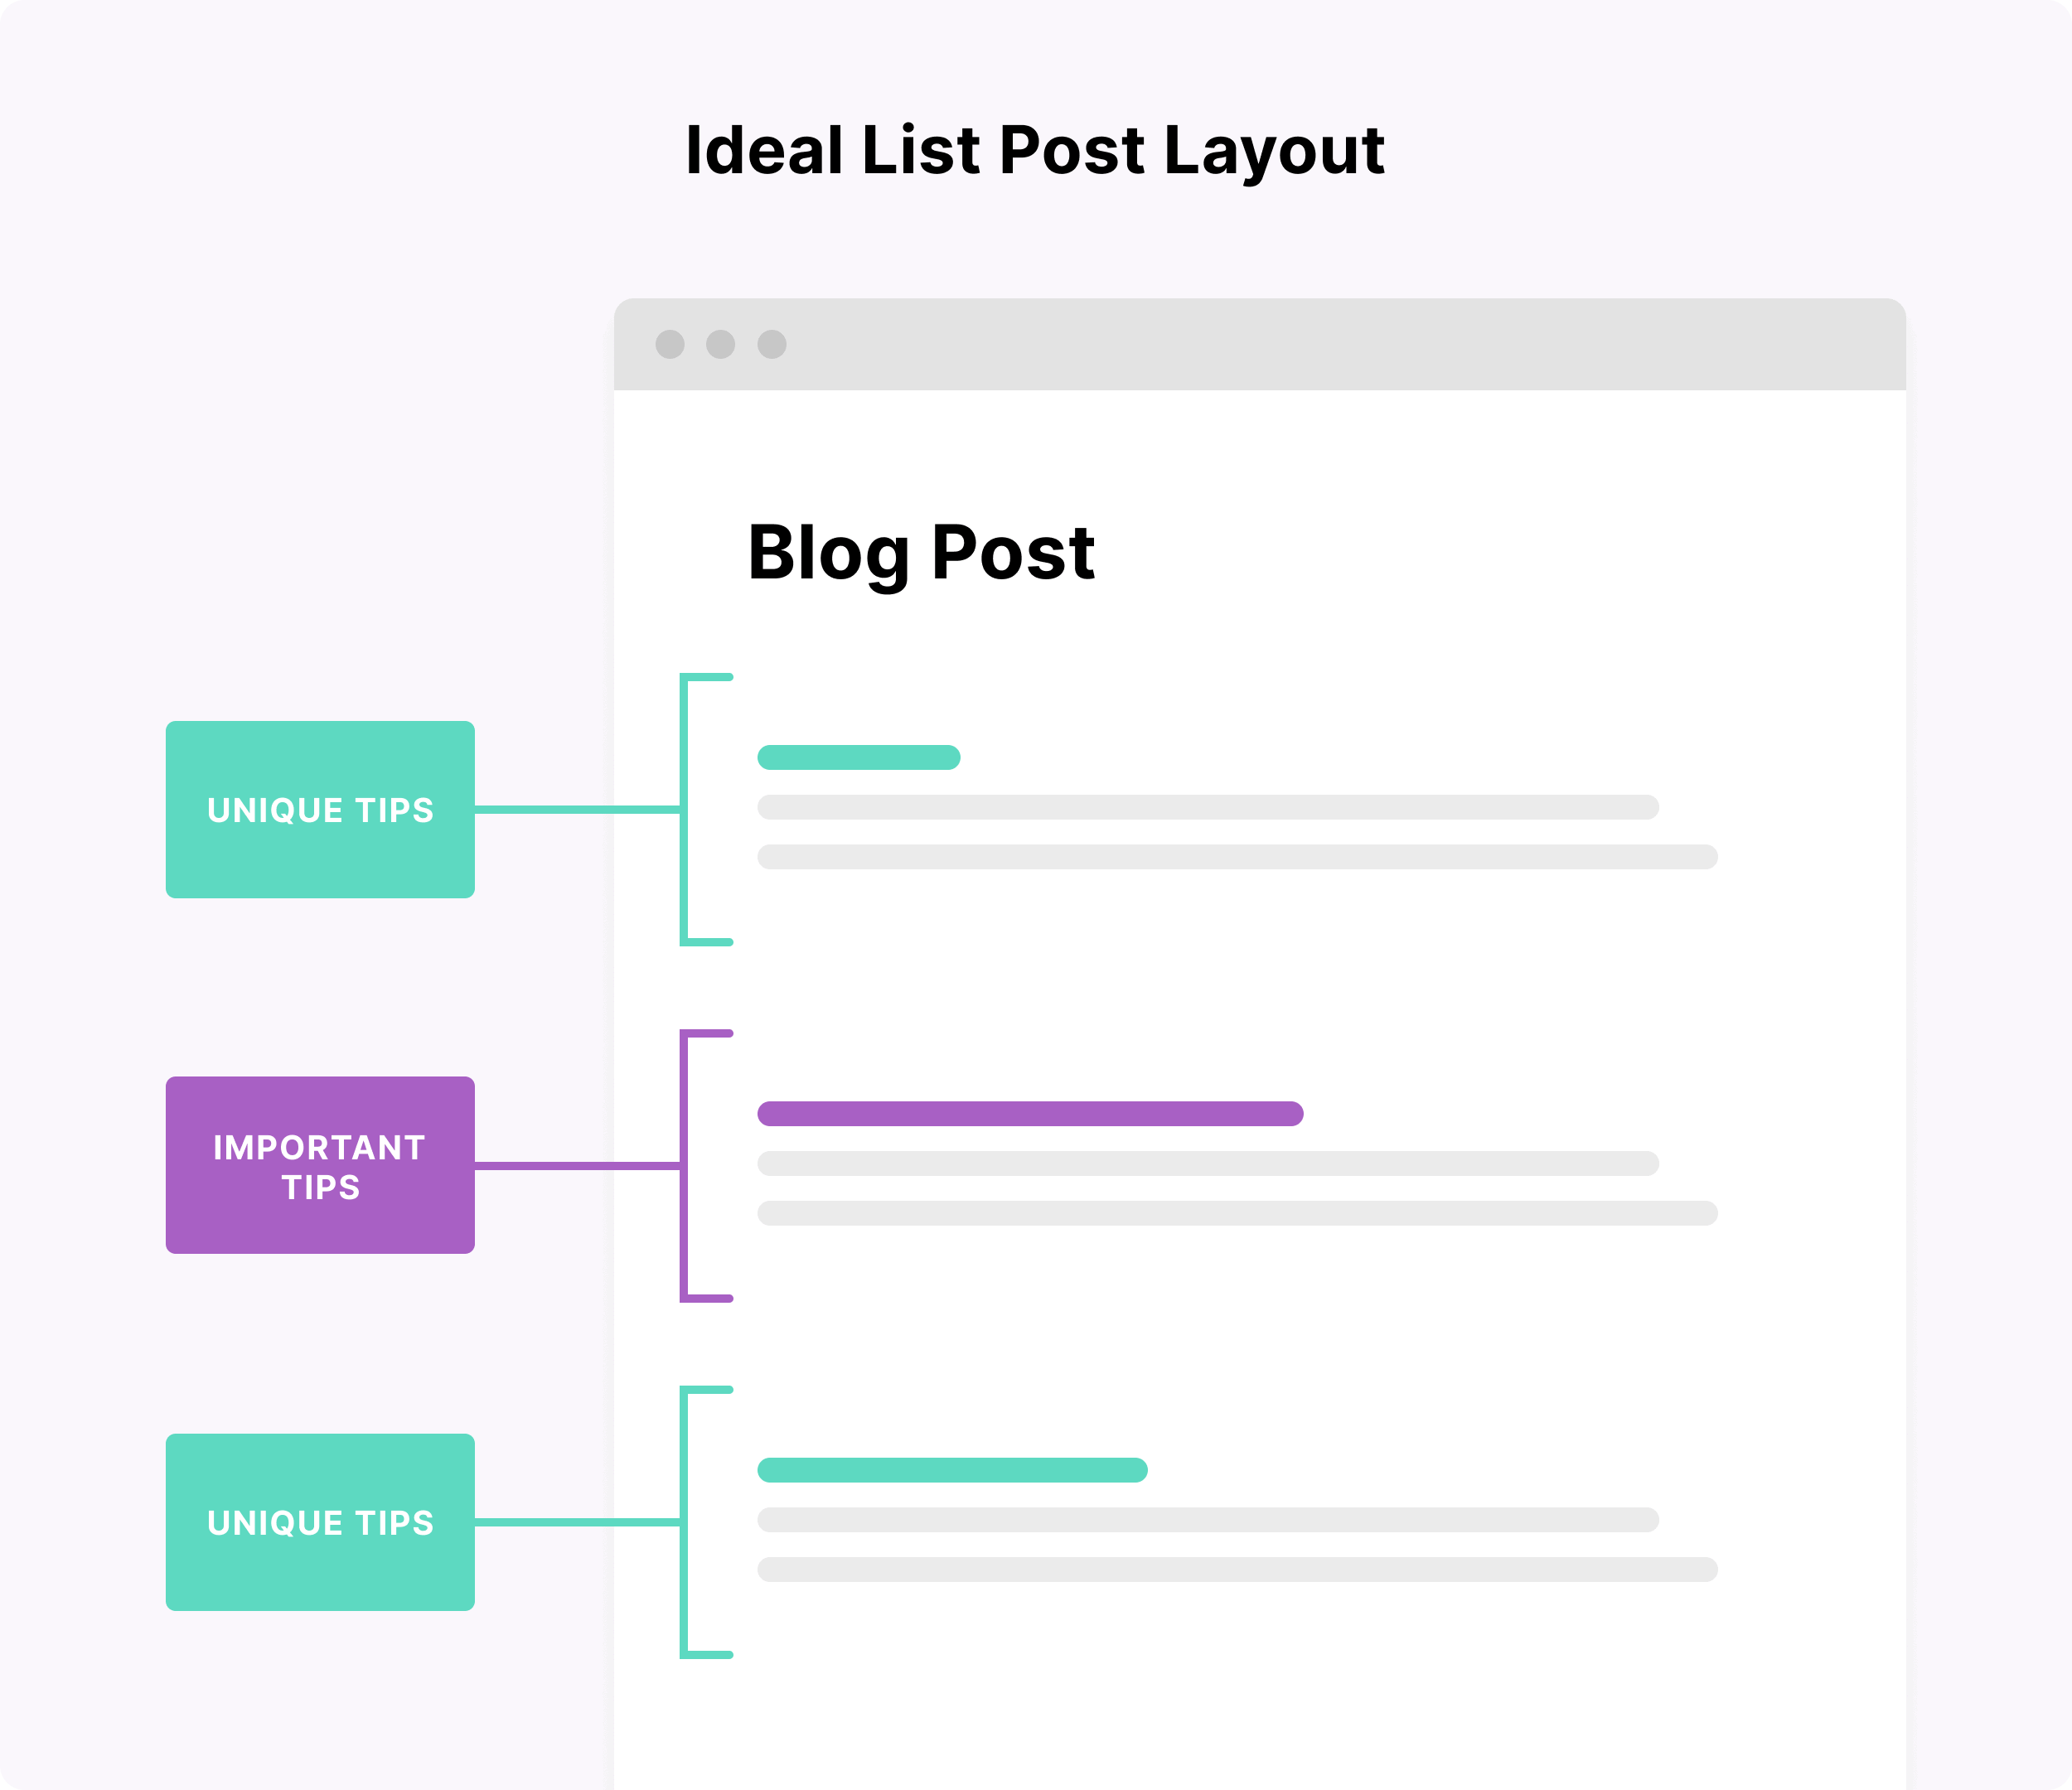 Ideal list post layout